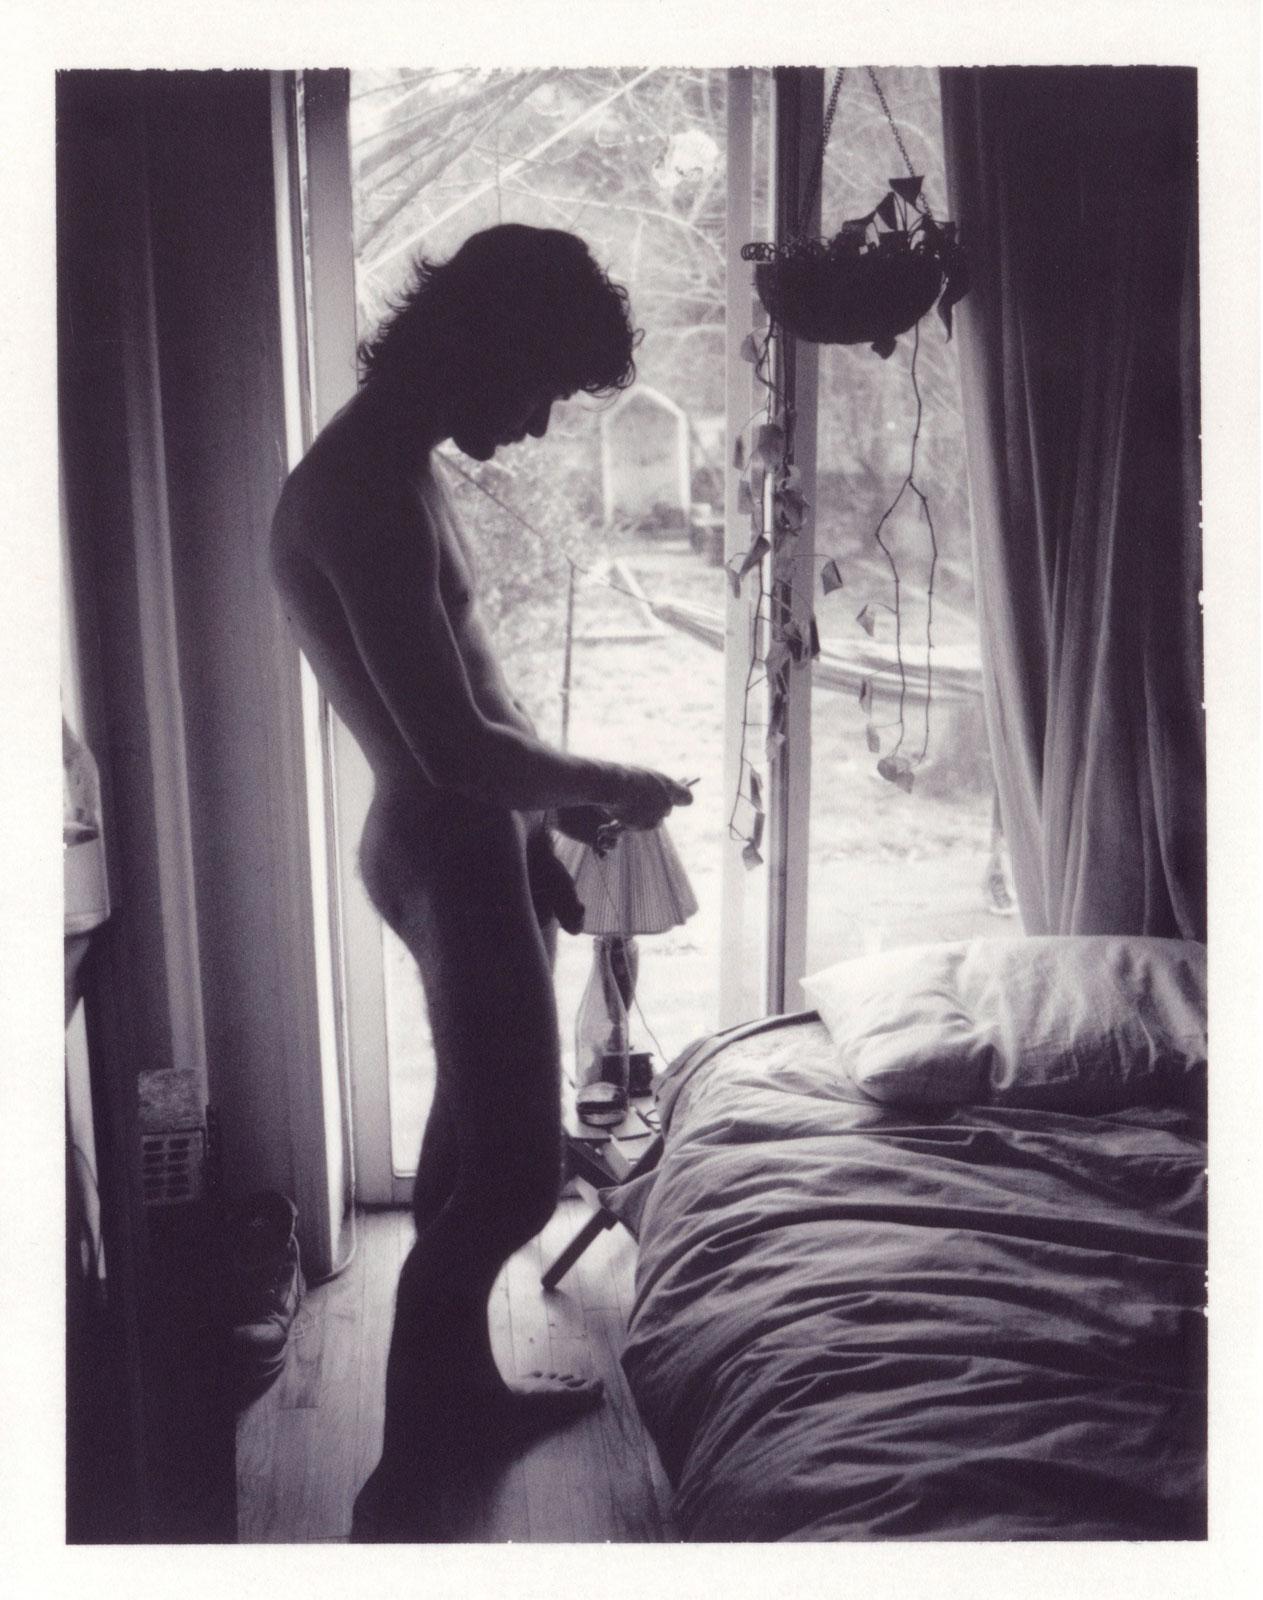 Tanner's Room in Greenpoint (Young, hung nude man checks iPhone by unmade bed) - Photograph by Sebastian Perinotti